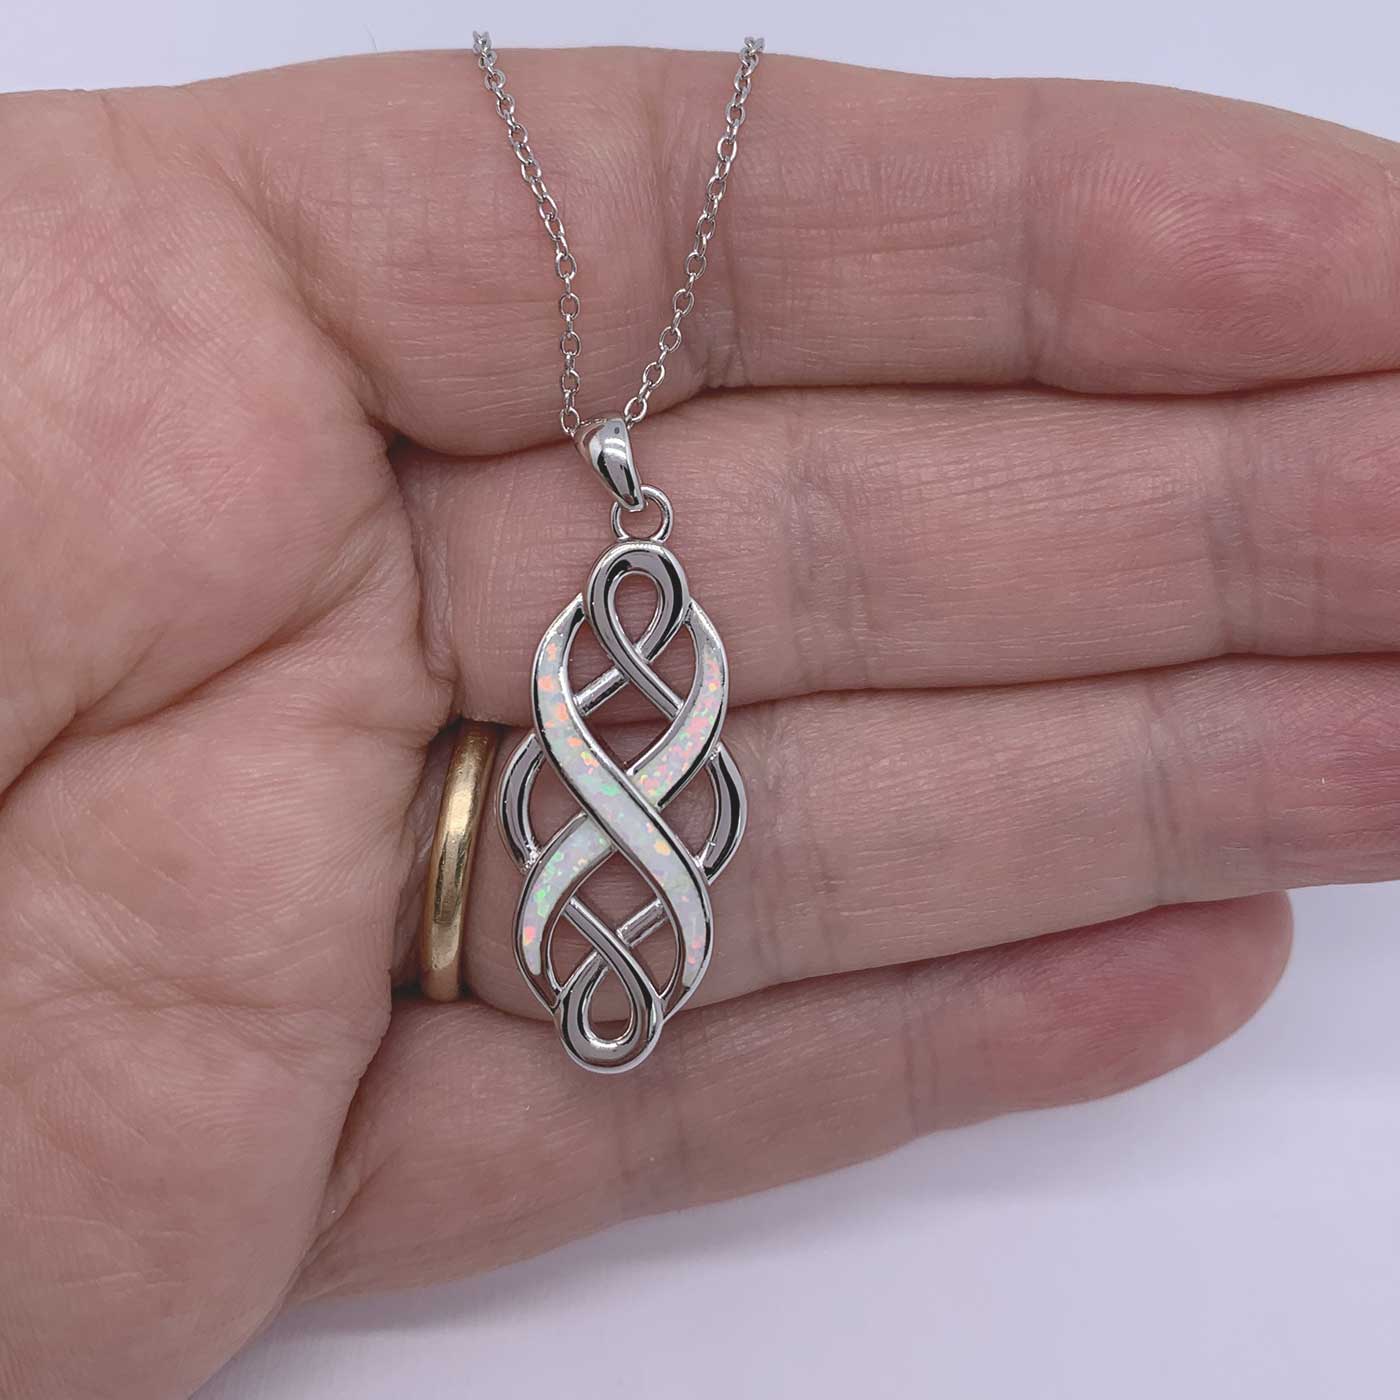 Silver Celtic Spiral Knot Necklace and Sterling Silver Chain